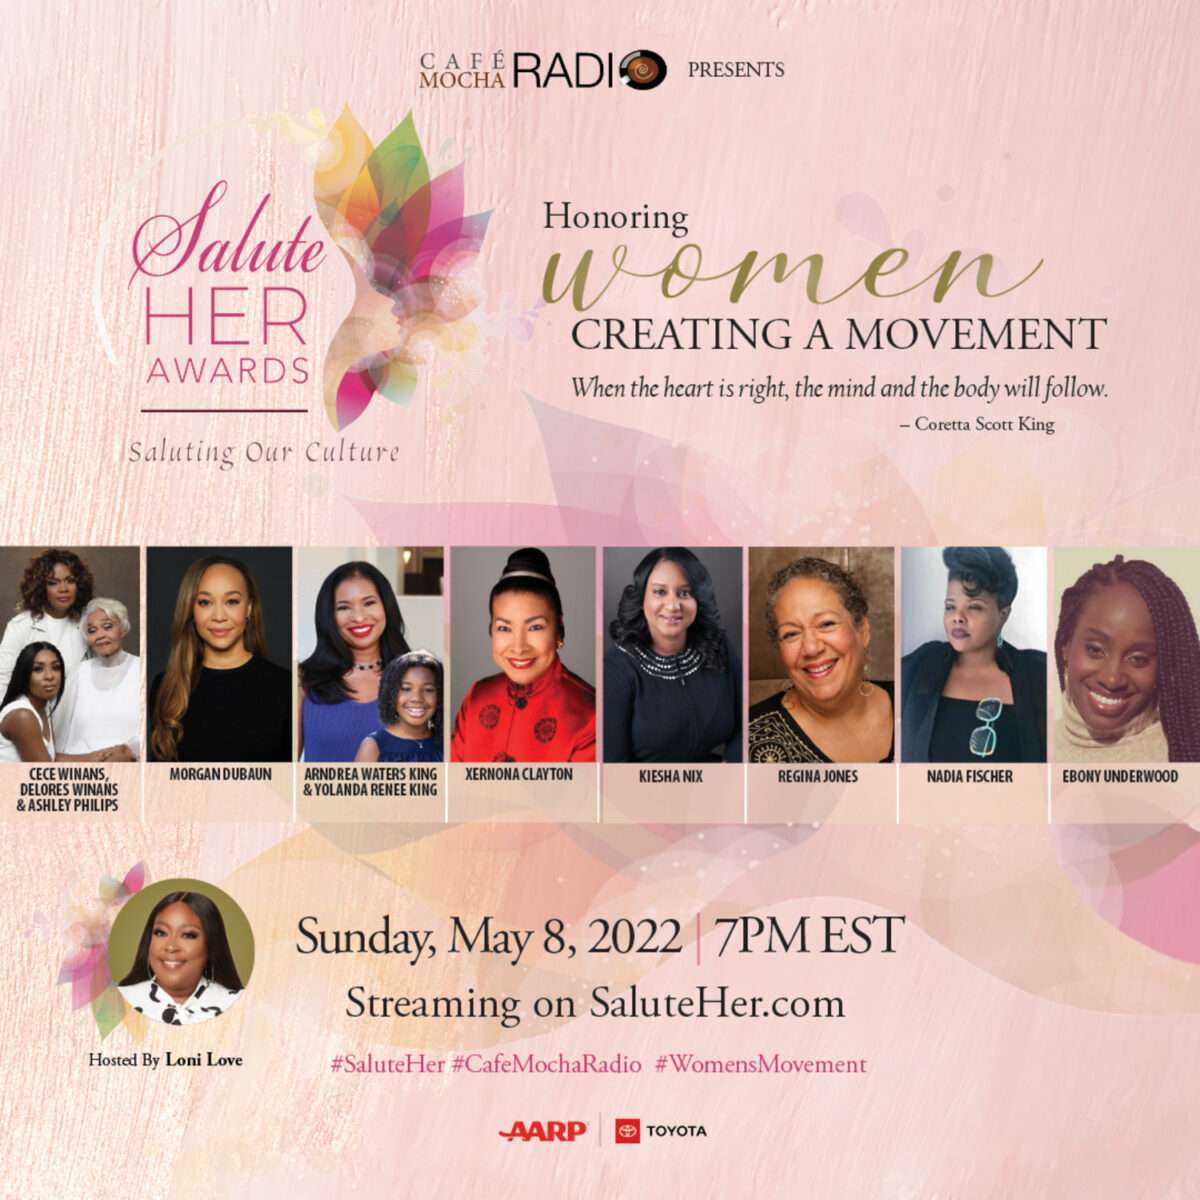 cece-winans-to-be-honored-along-with-her-daughter-ashley-phillips-and-winans-family-matriarch-delores-winans-at-the-salute-her-awards